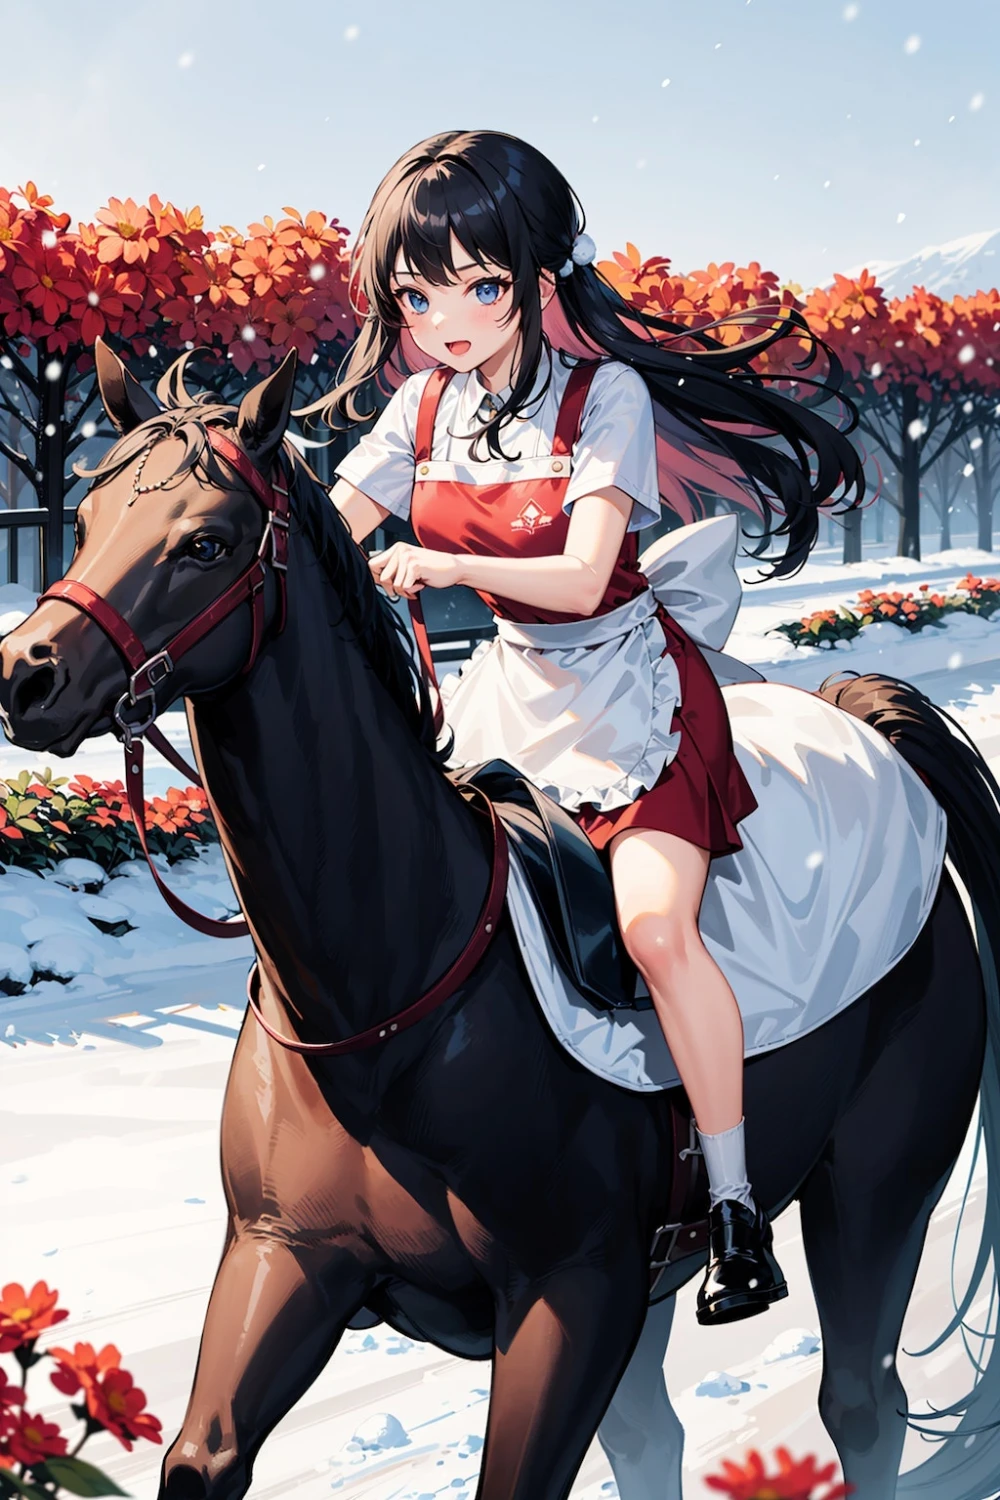 horse-anime-style-all-ages-15